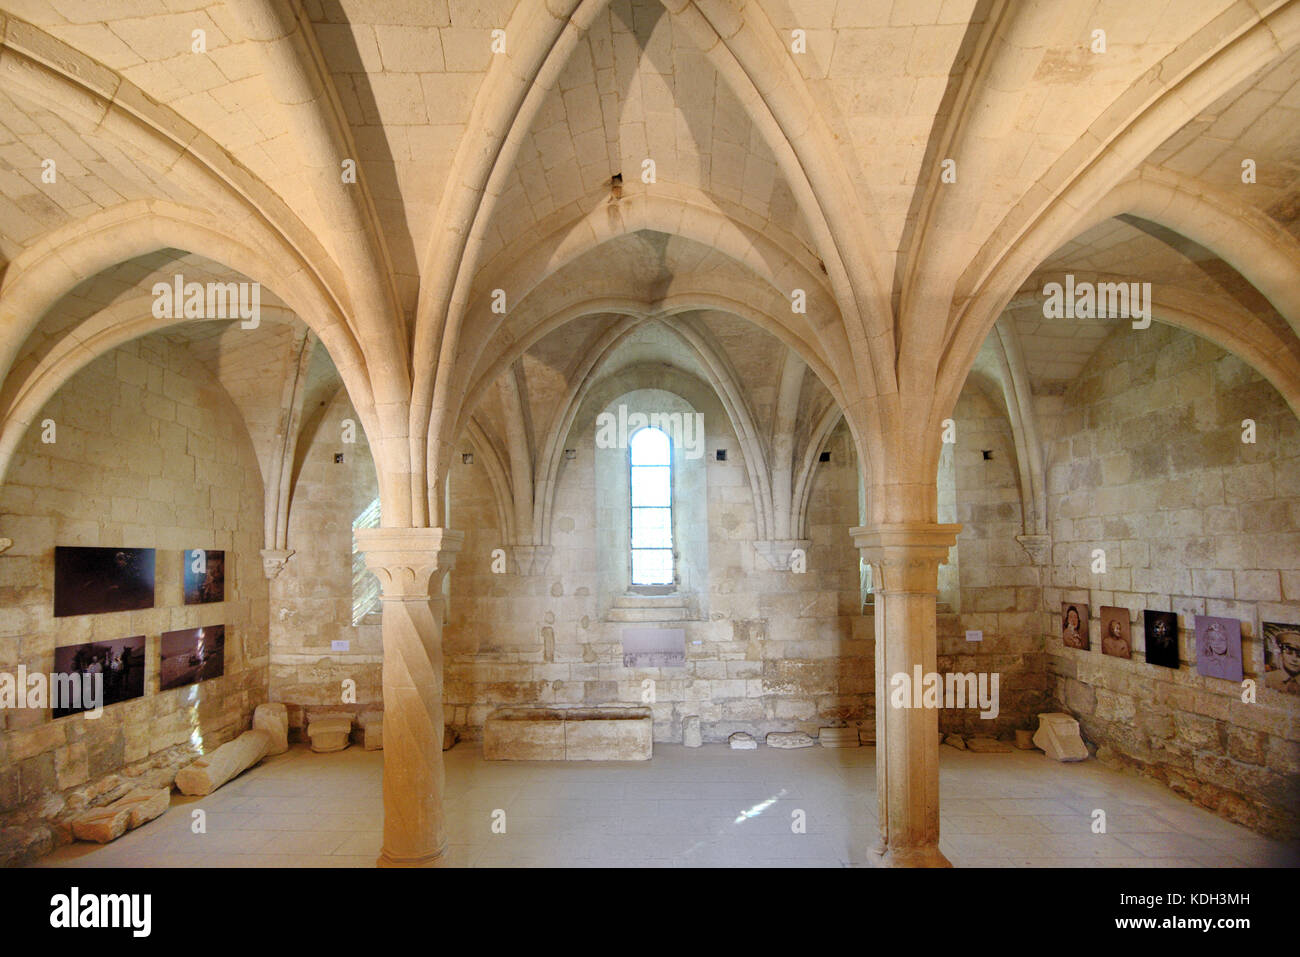 Ribbed Vaulting & Vaulted Interior of Silvacane Abbey (f.1144), a former Cistercian Monastery, La Roque-d'Anthéon, Provence, France Stock Photo